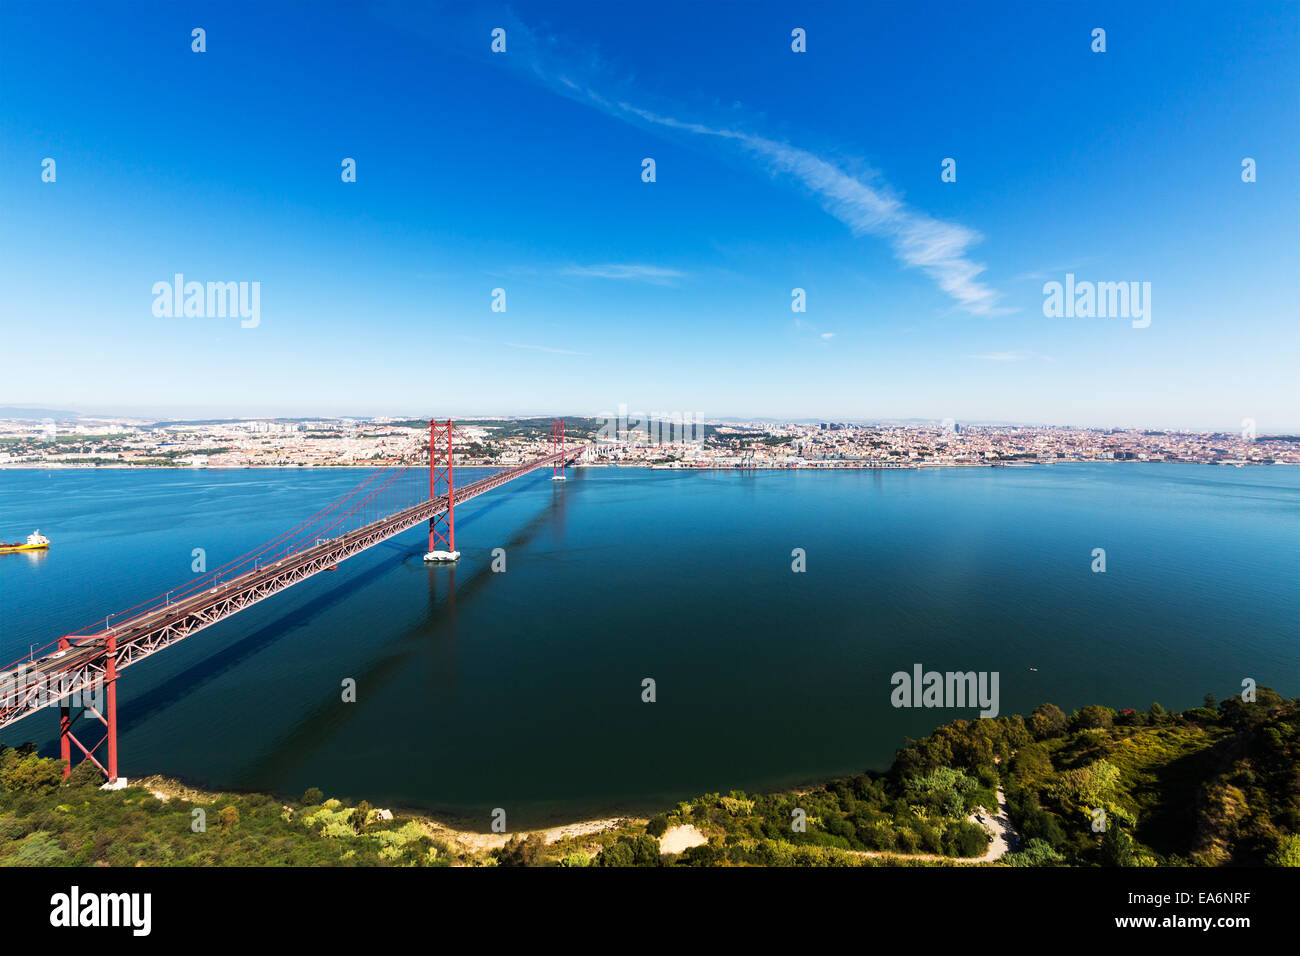 25 de Abril Cable-stayed Bridge over Tagus River, panoramic view Stock Photo